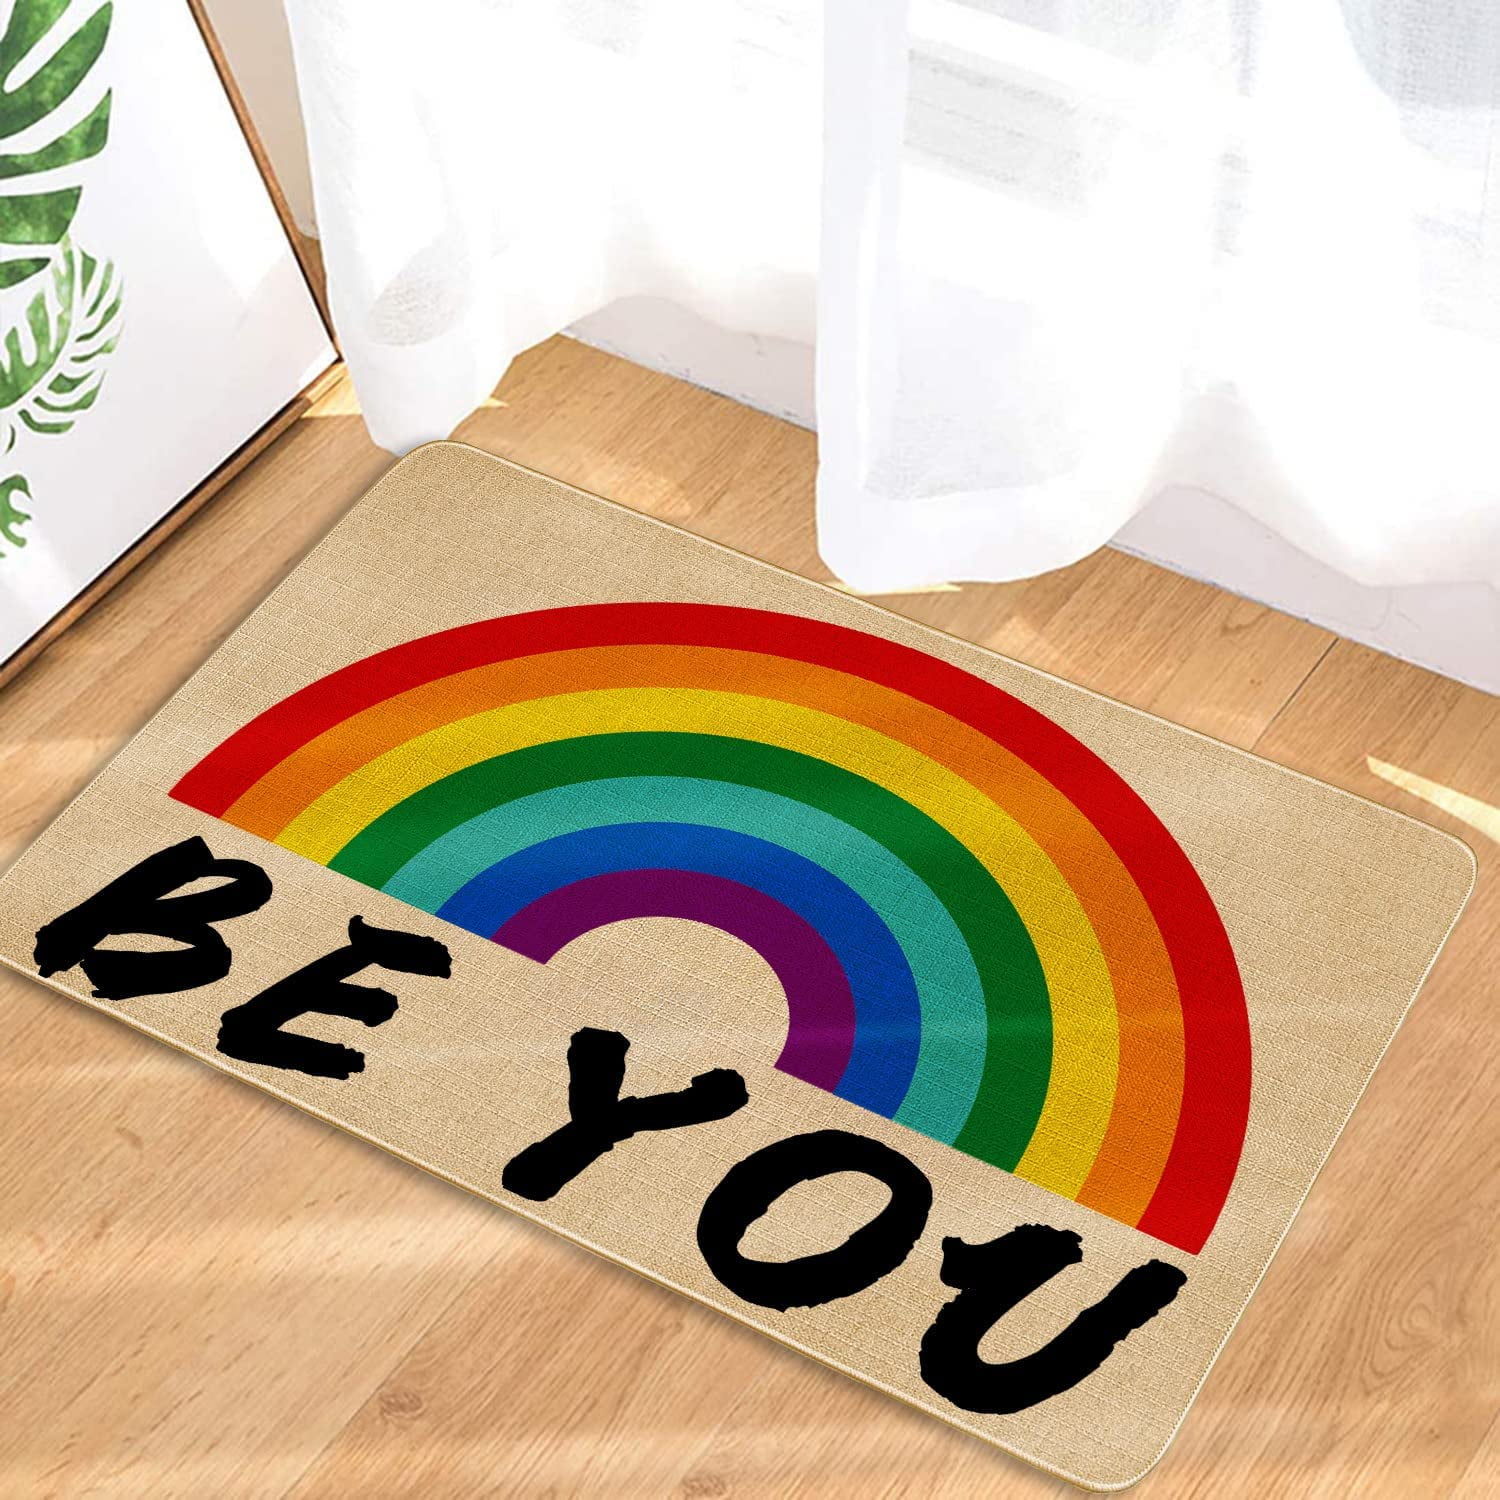 Rainbow Welcome Mat, Rainbow Outdoor Mat, Colorful Front Entry Mat, Bright  Color Front Porch Decor, Colorful Front Door Decor, Rainbow Decor 